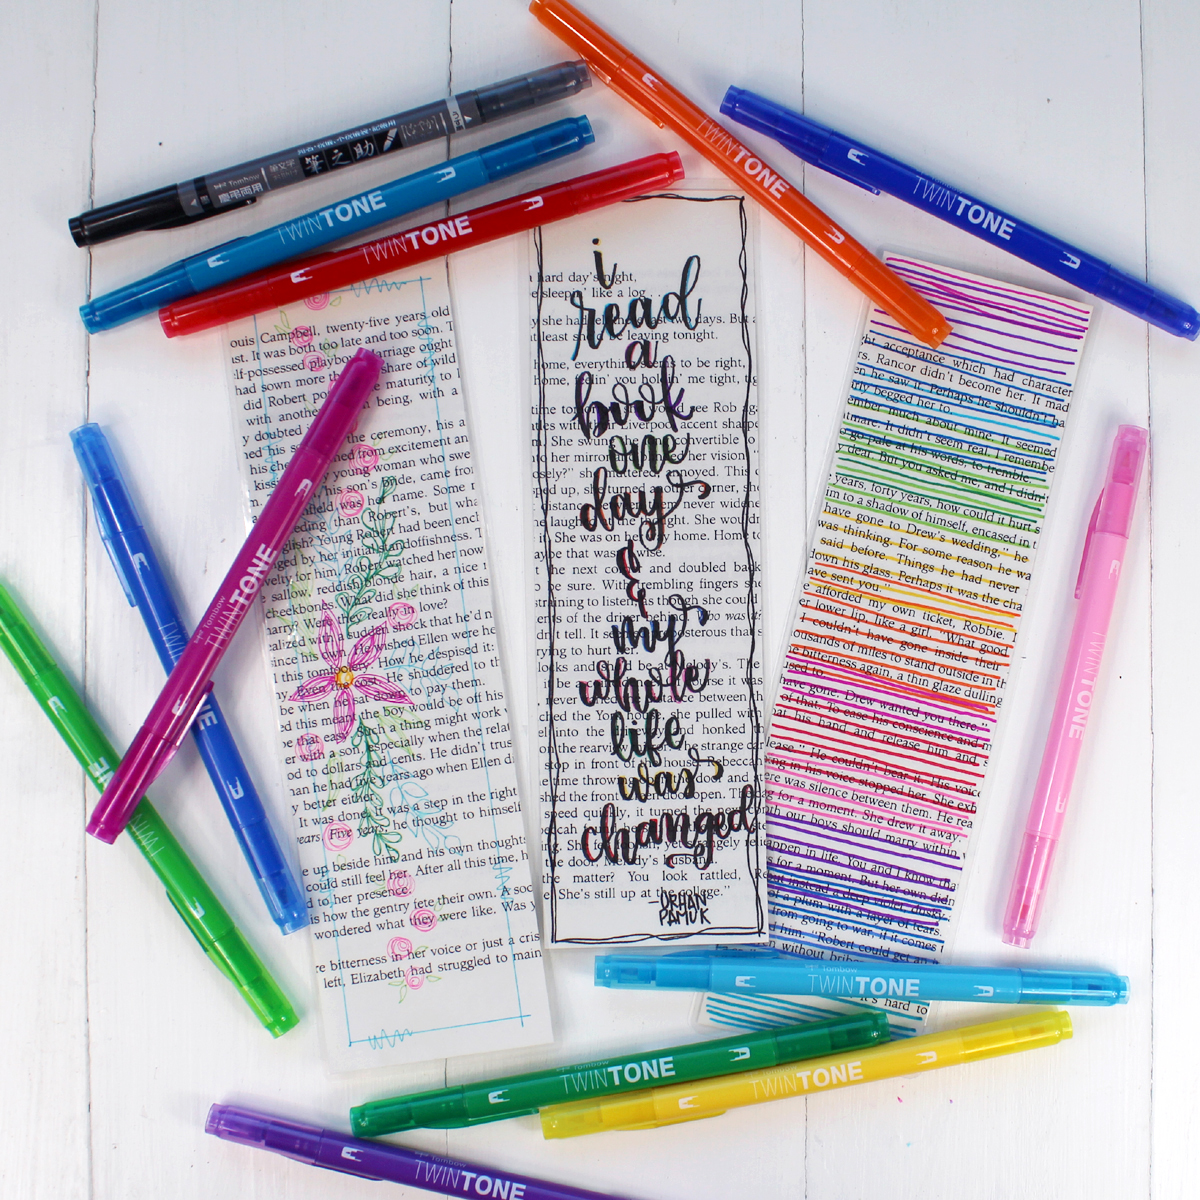 Hi Tombow friends, it's Natalie from Doodlecraft showing a quick upcycled craft. Create easy book page bookmarks with Tombow TwinTone Markers and an old book page. Fun craft for heading back to school, distance learning or homeschool. 